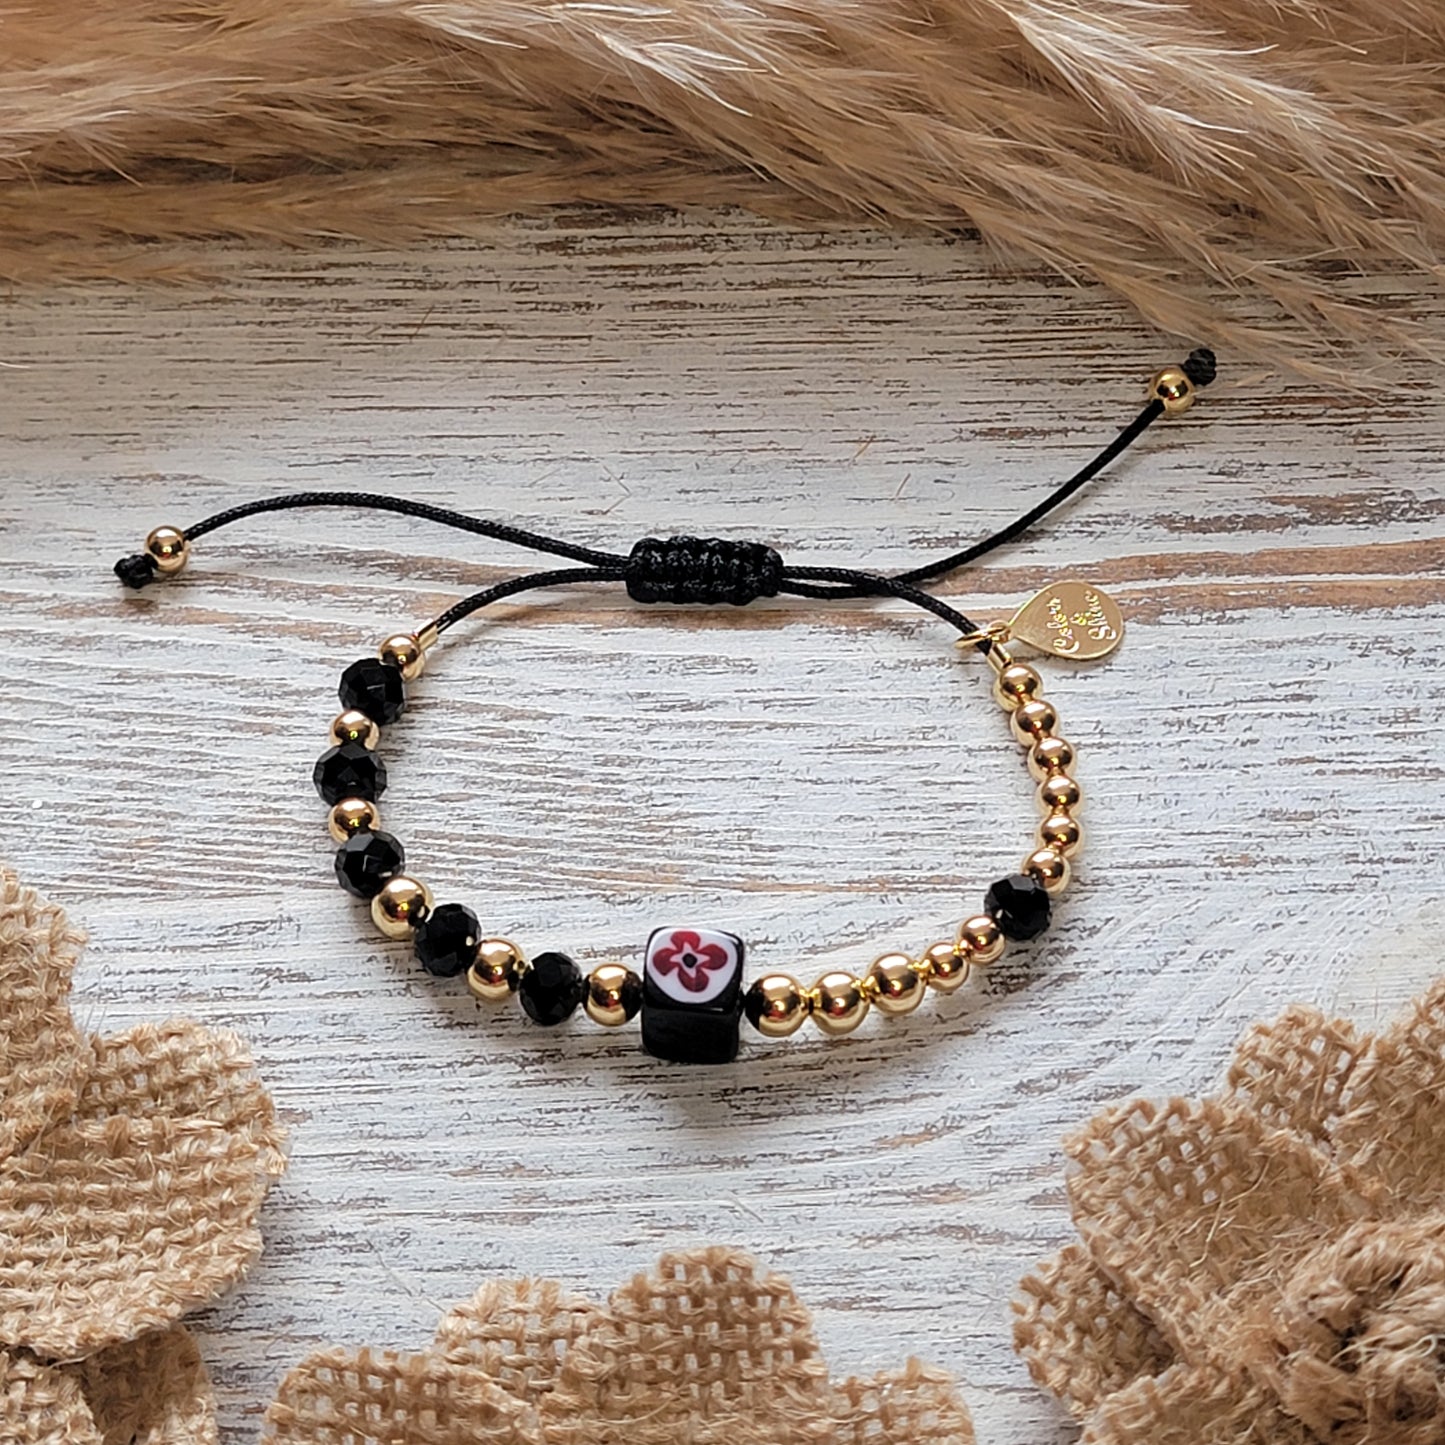 Crystal Bracelet With Square Glass Bead &18K Gold-Plated Details (Available in Many Colors)